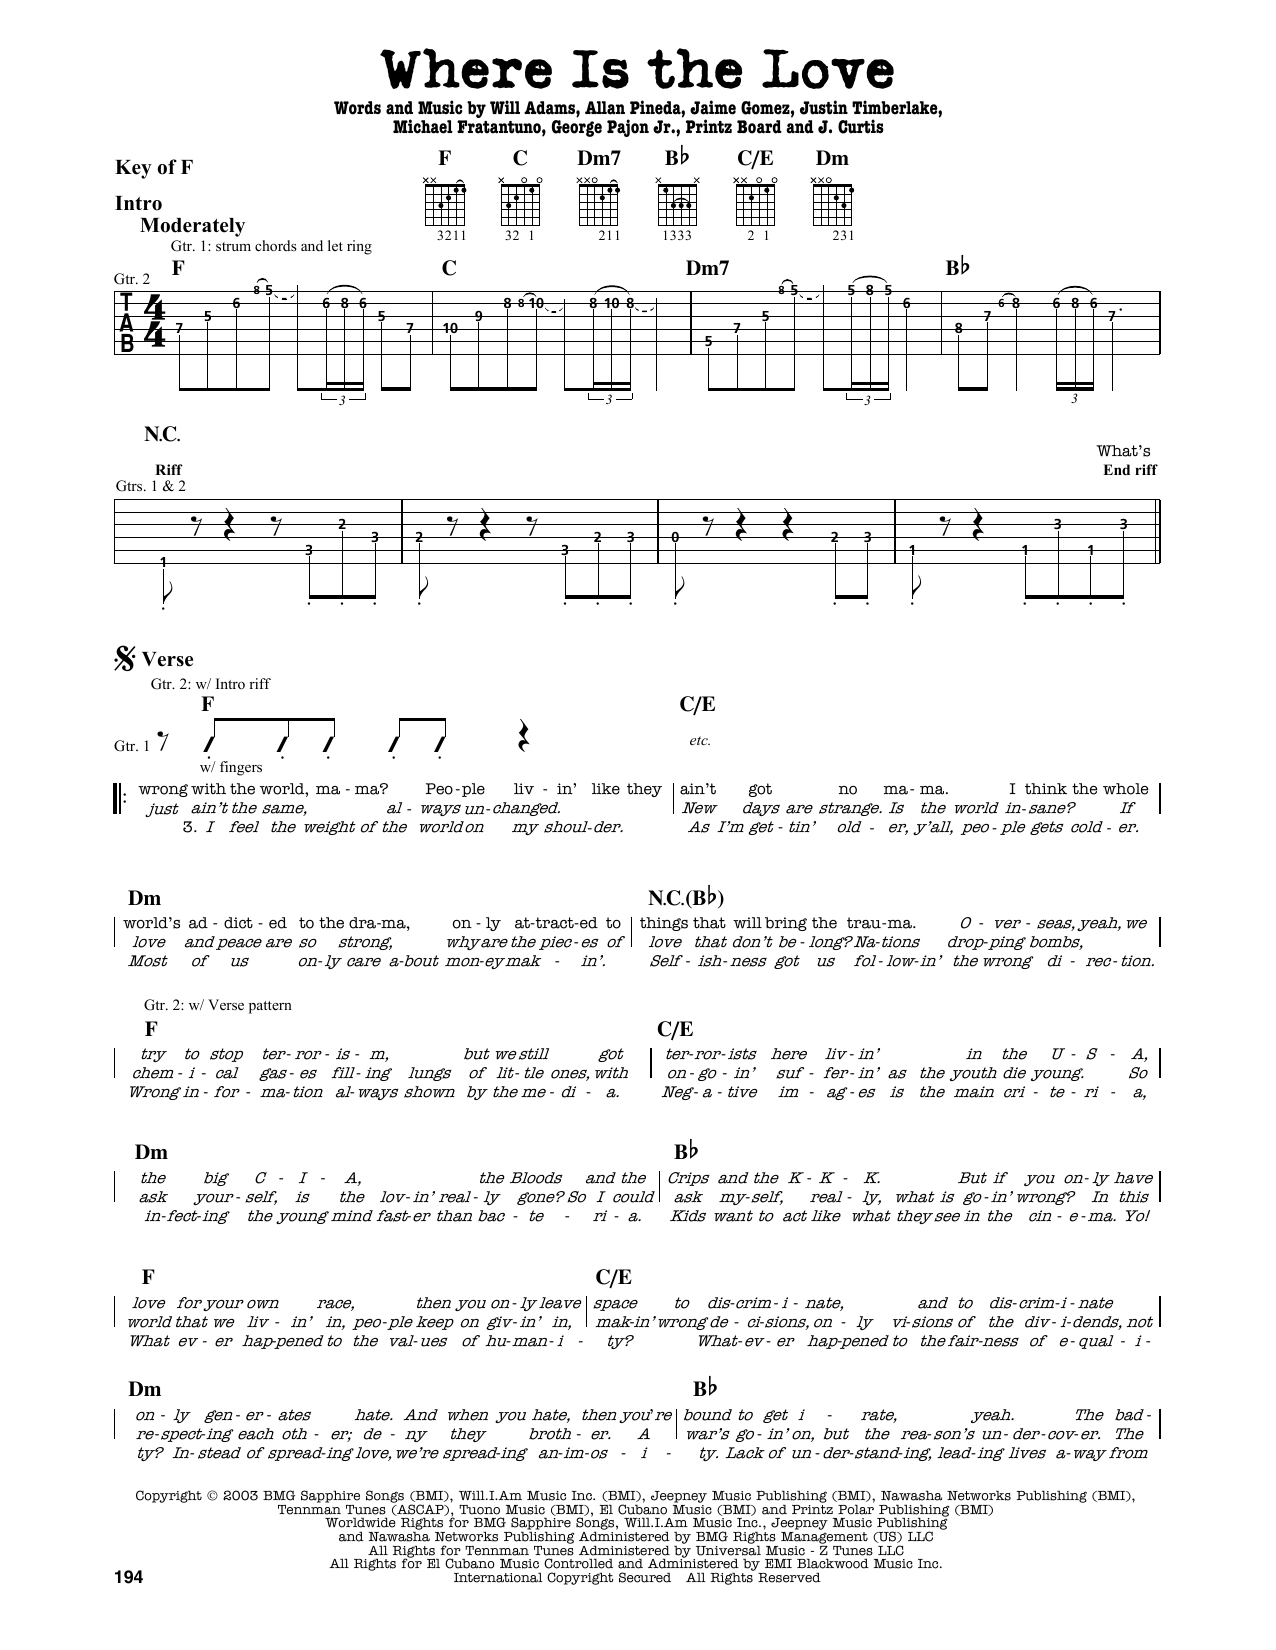 Download The Black Eyed Peas Where Is The Love? Sheet Music